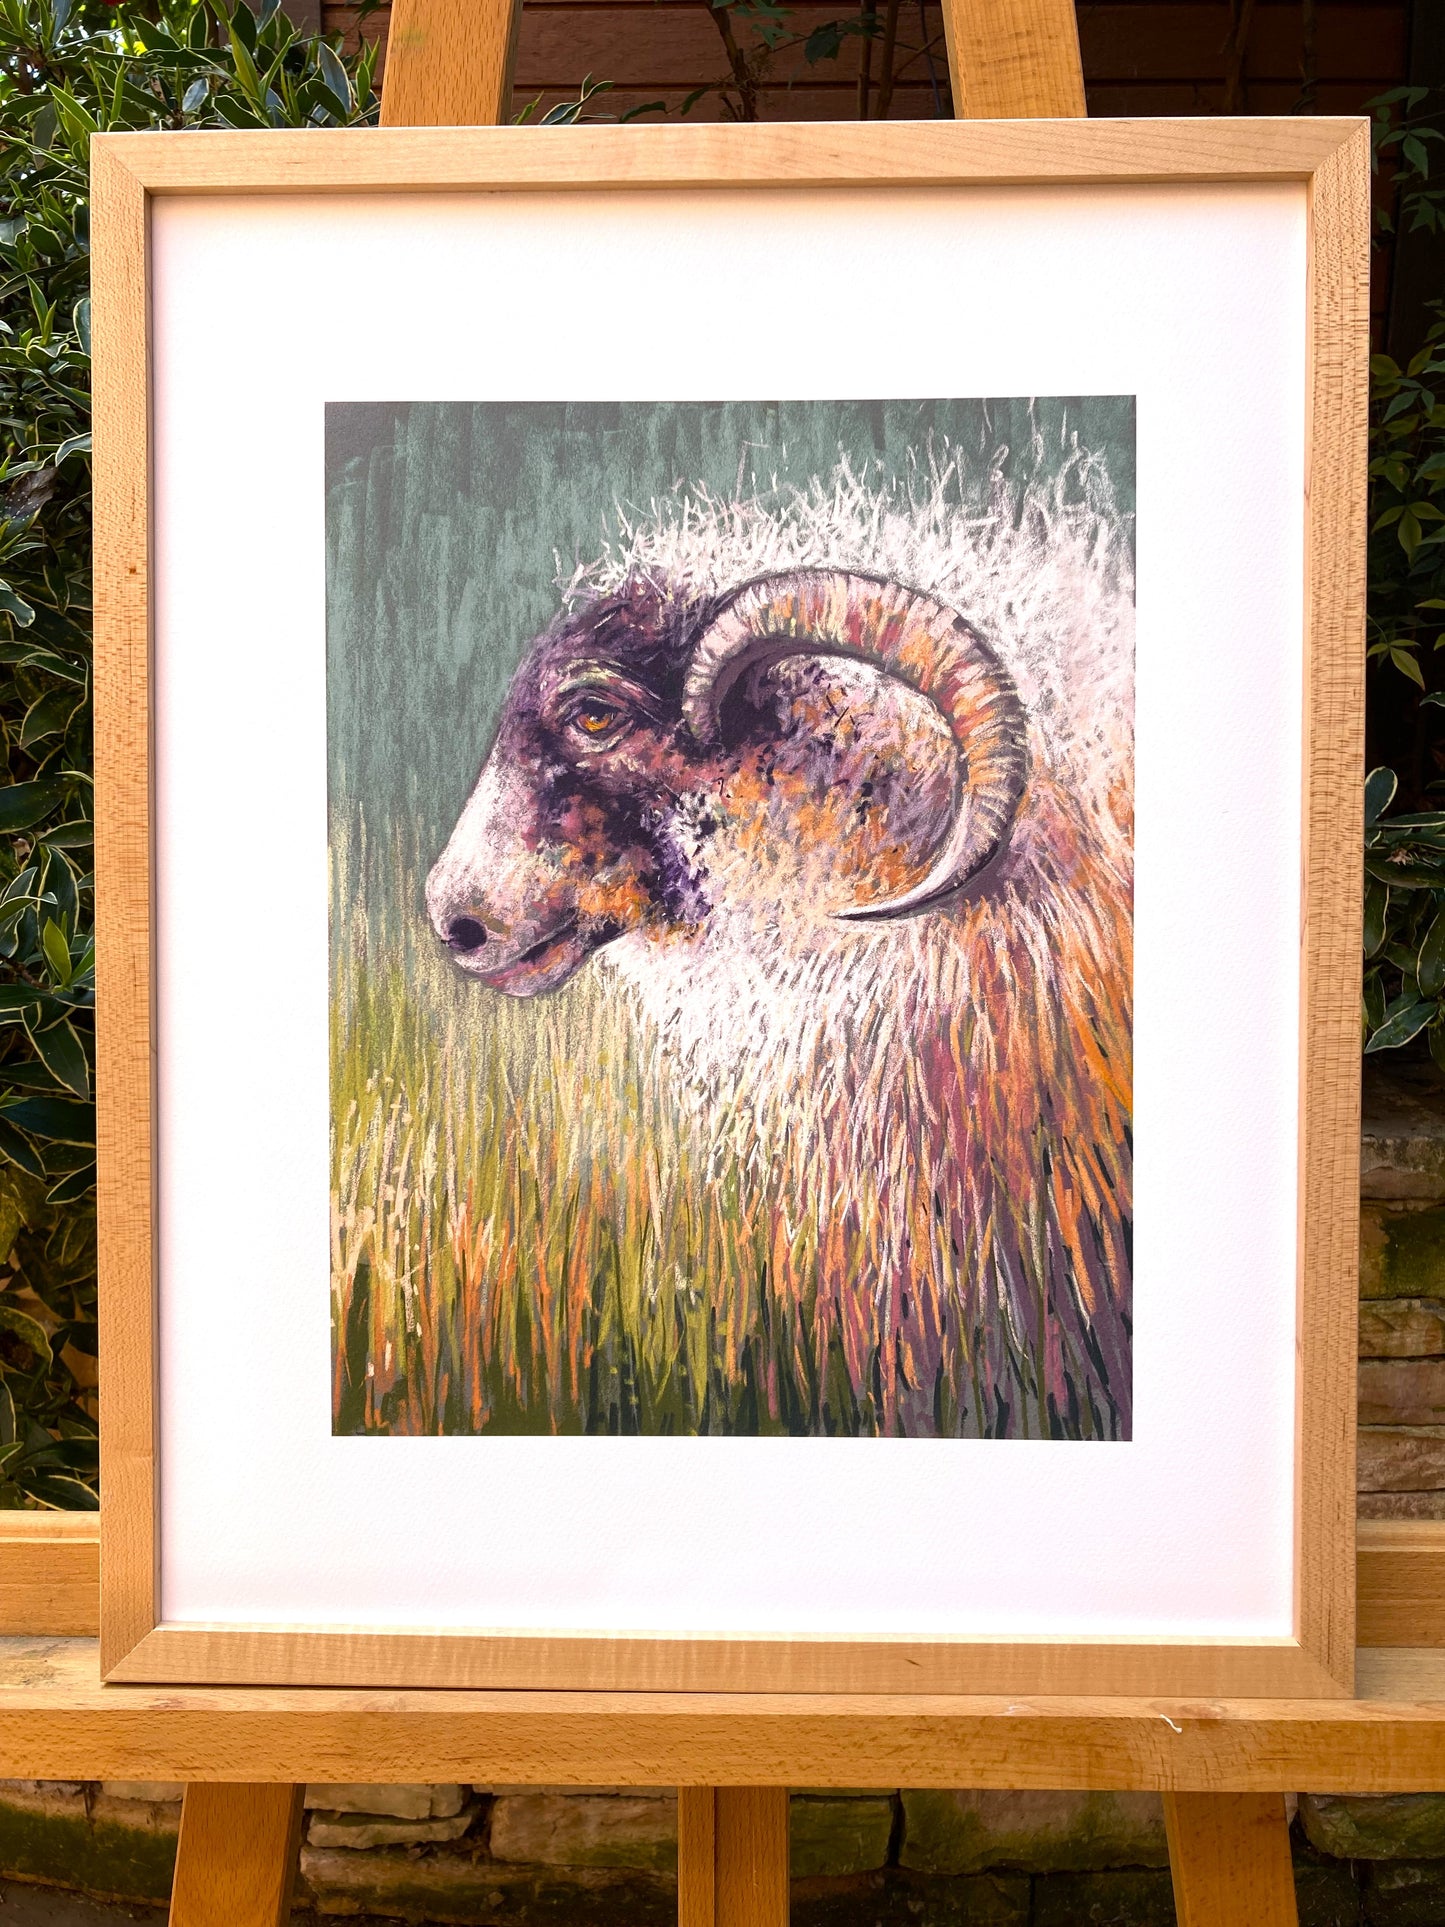 Example. Sheep print in a wooden frame